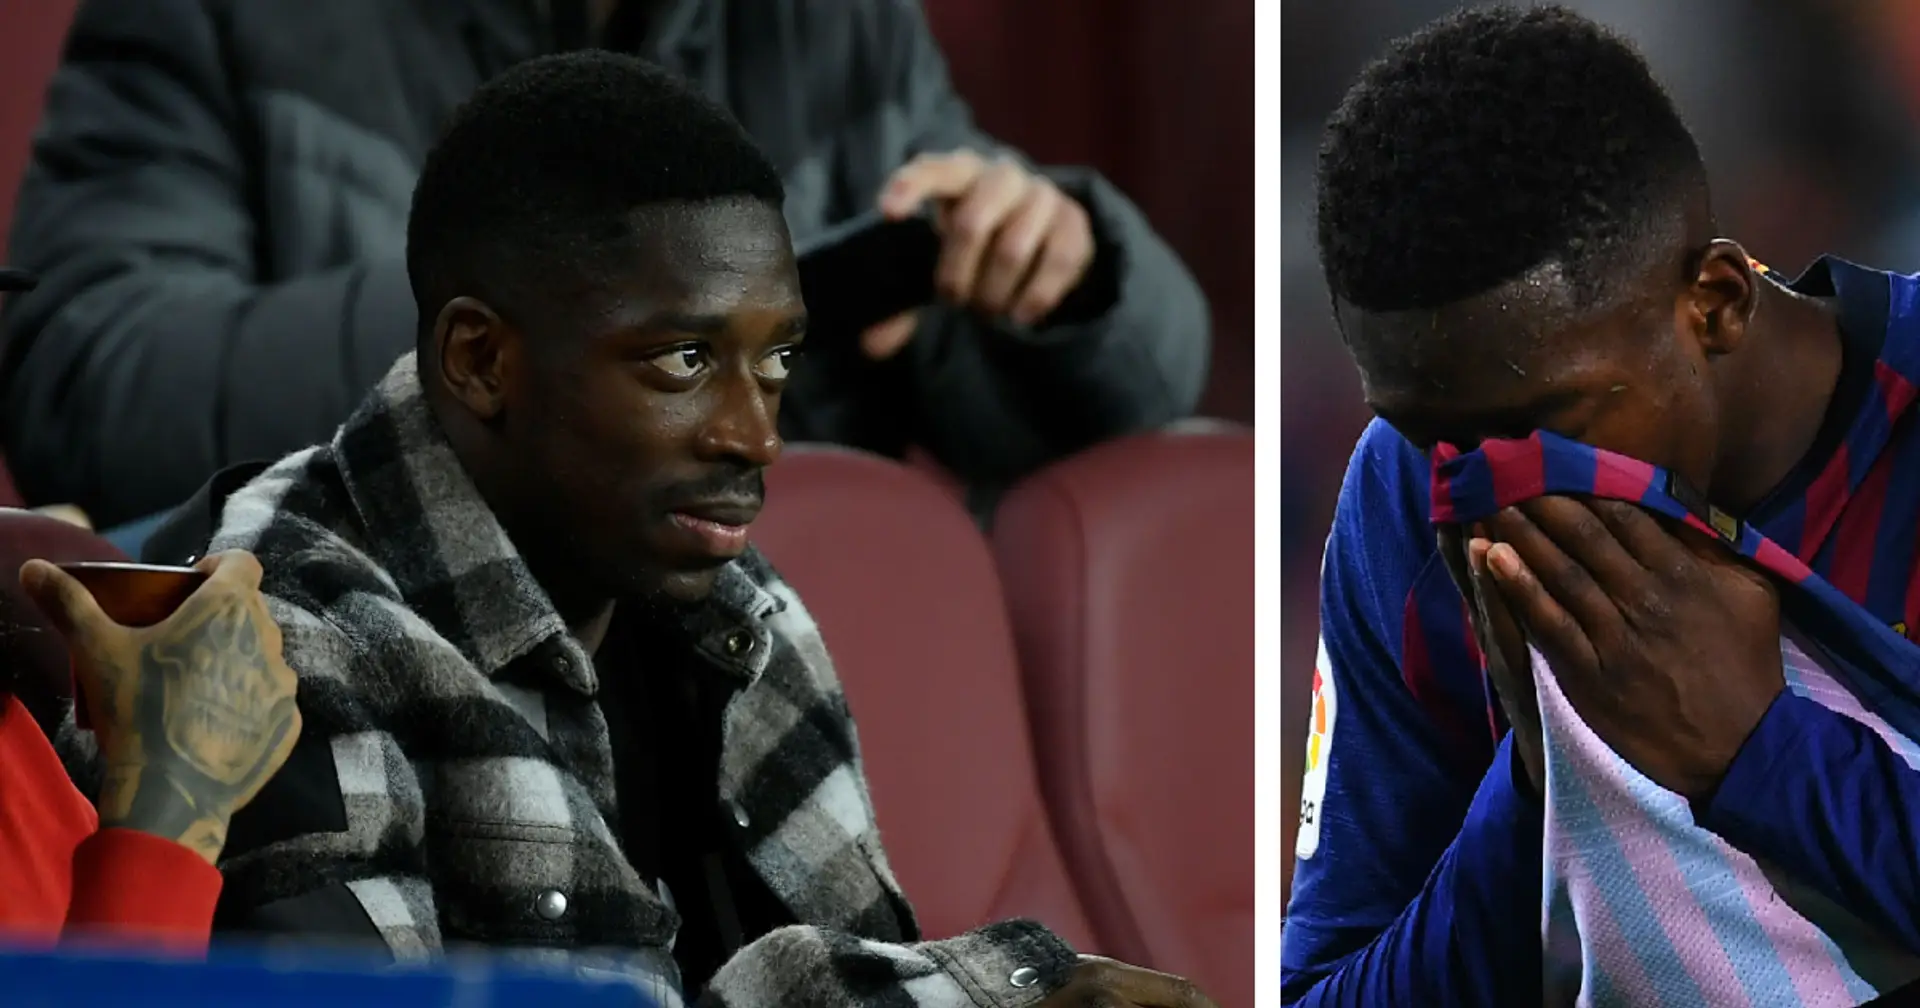 Barcelona reportedly offer Dembele deal with less salary, club to sell or bench him if he doesn't sign